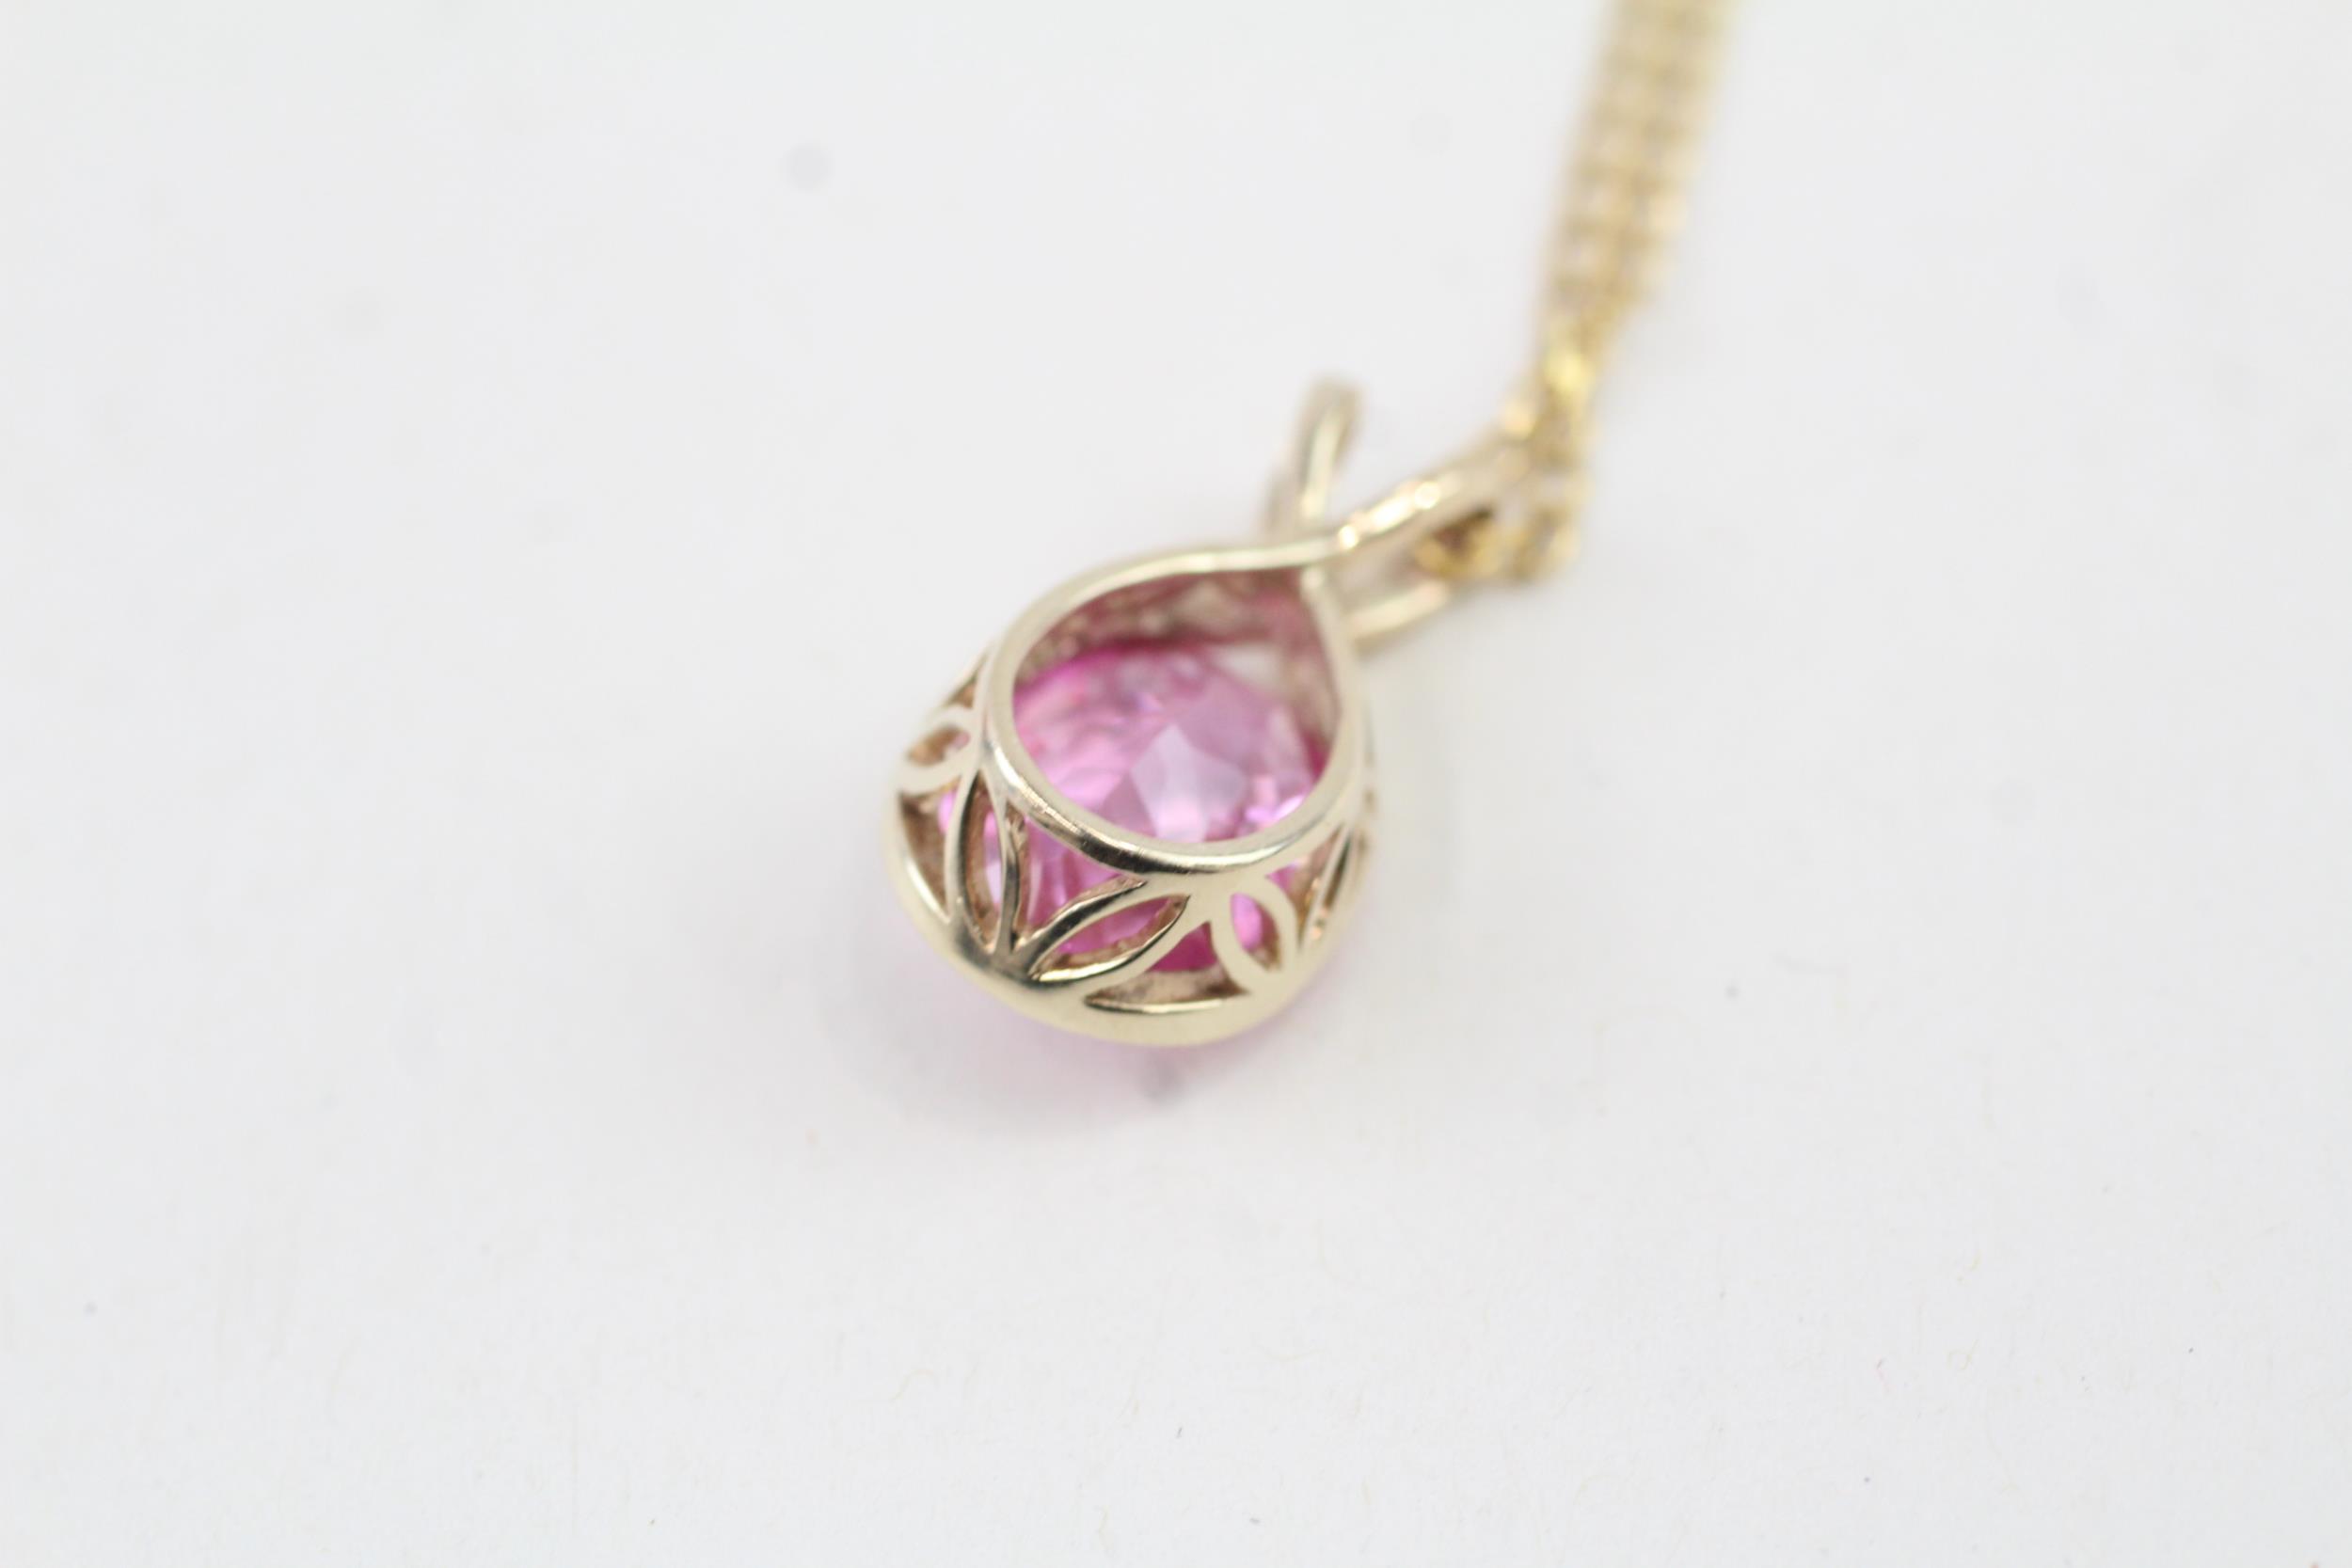 9ct gold faceted synthetic pink sapphire pendant necklace (4.2g) - Image 2 of 5